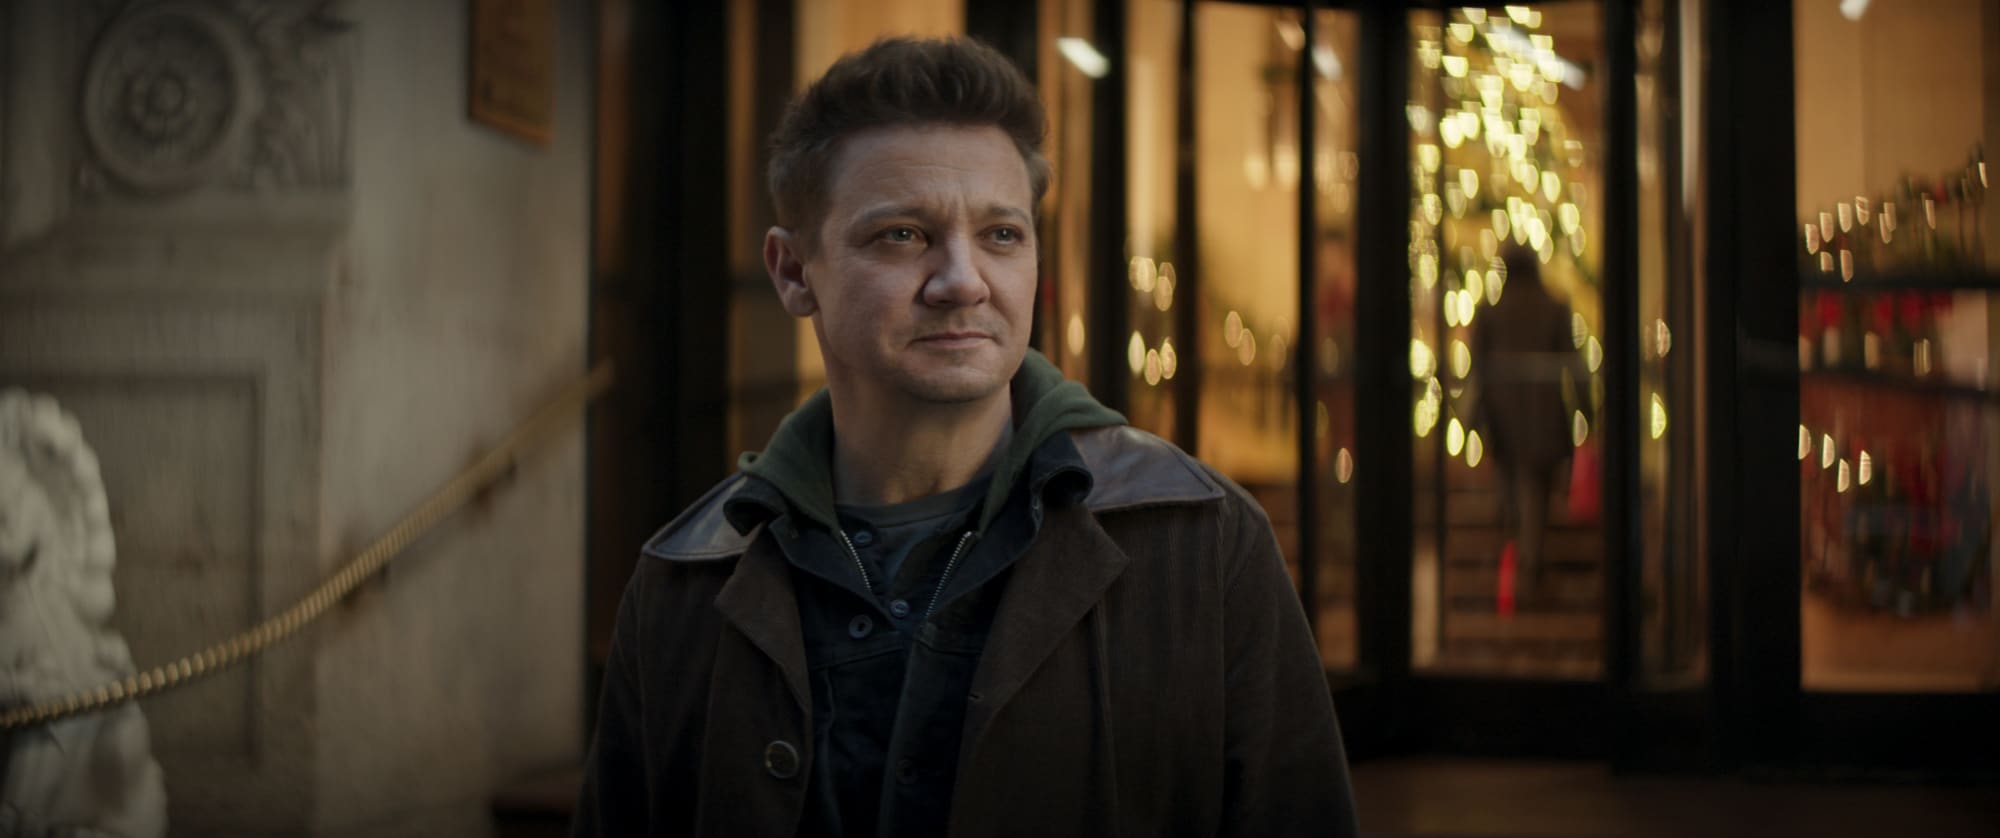 Hawkeye episode 6 release date: When does the season finale come out?